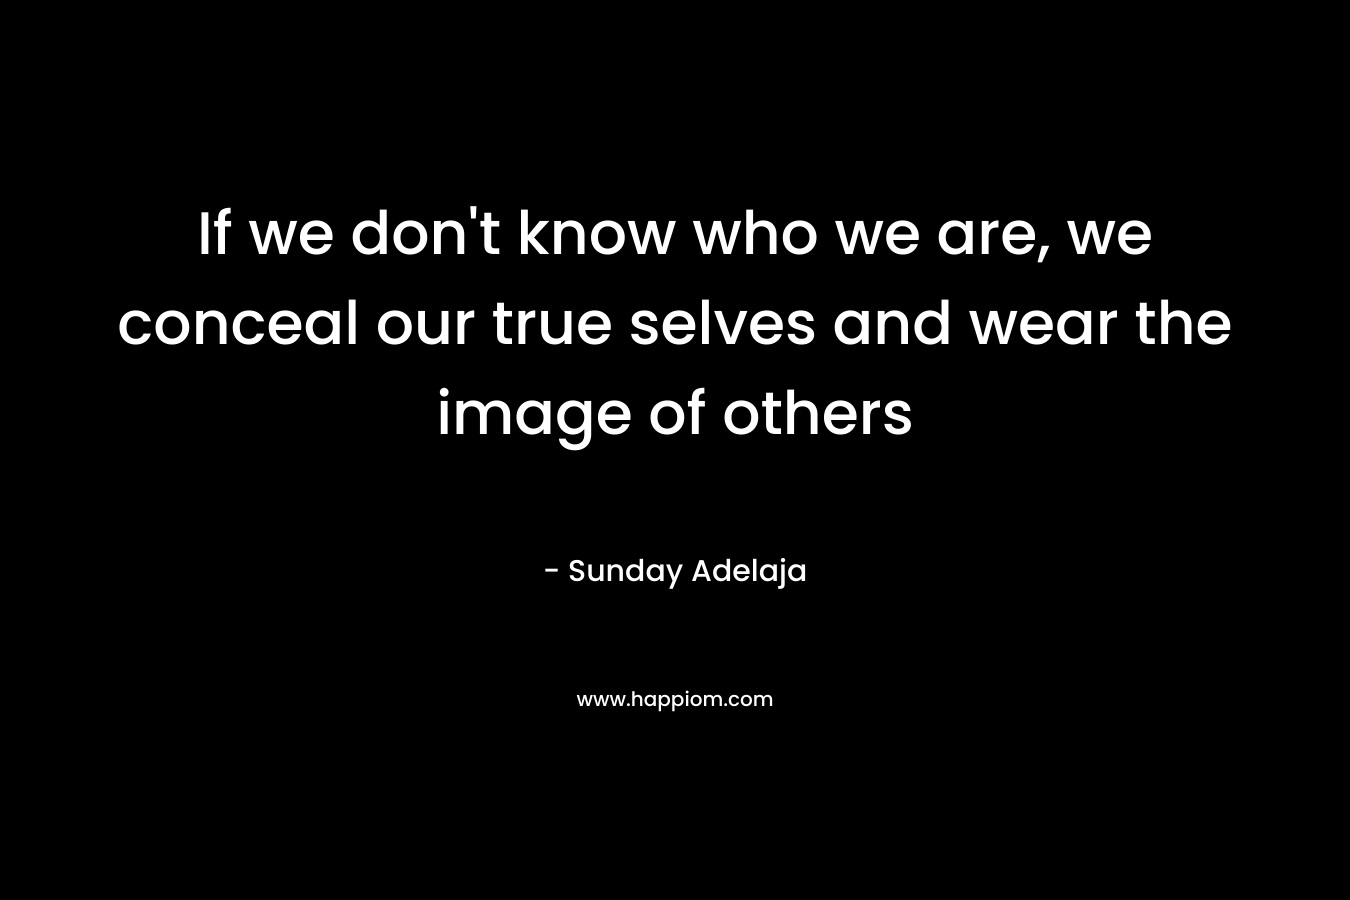 If we don’t know who we are, we conceal our true selves and wear the image of others – Sunday Adelaja